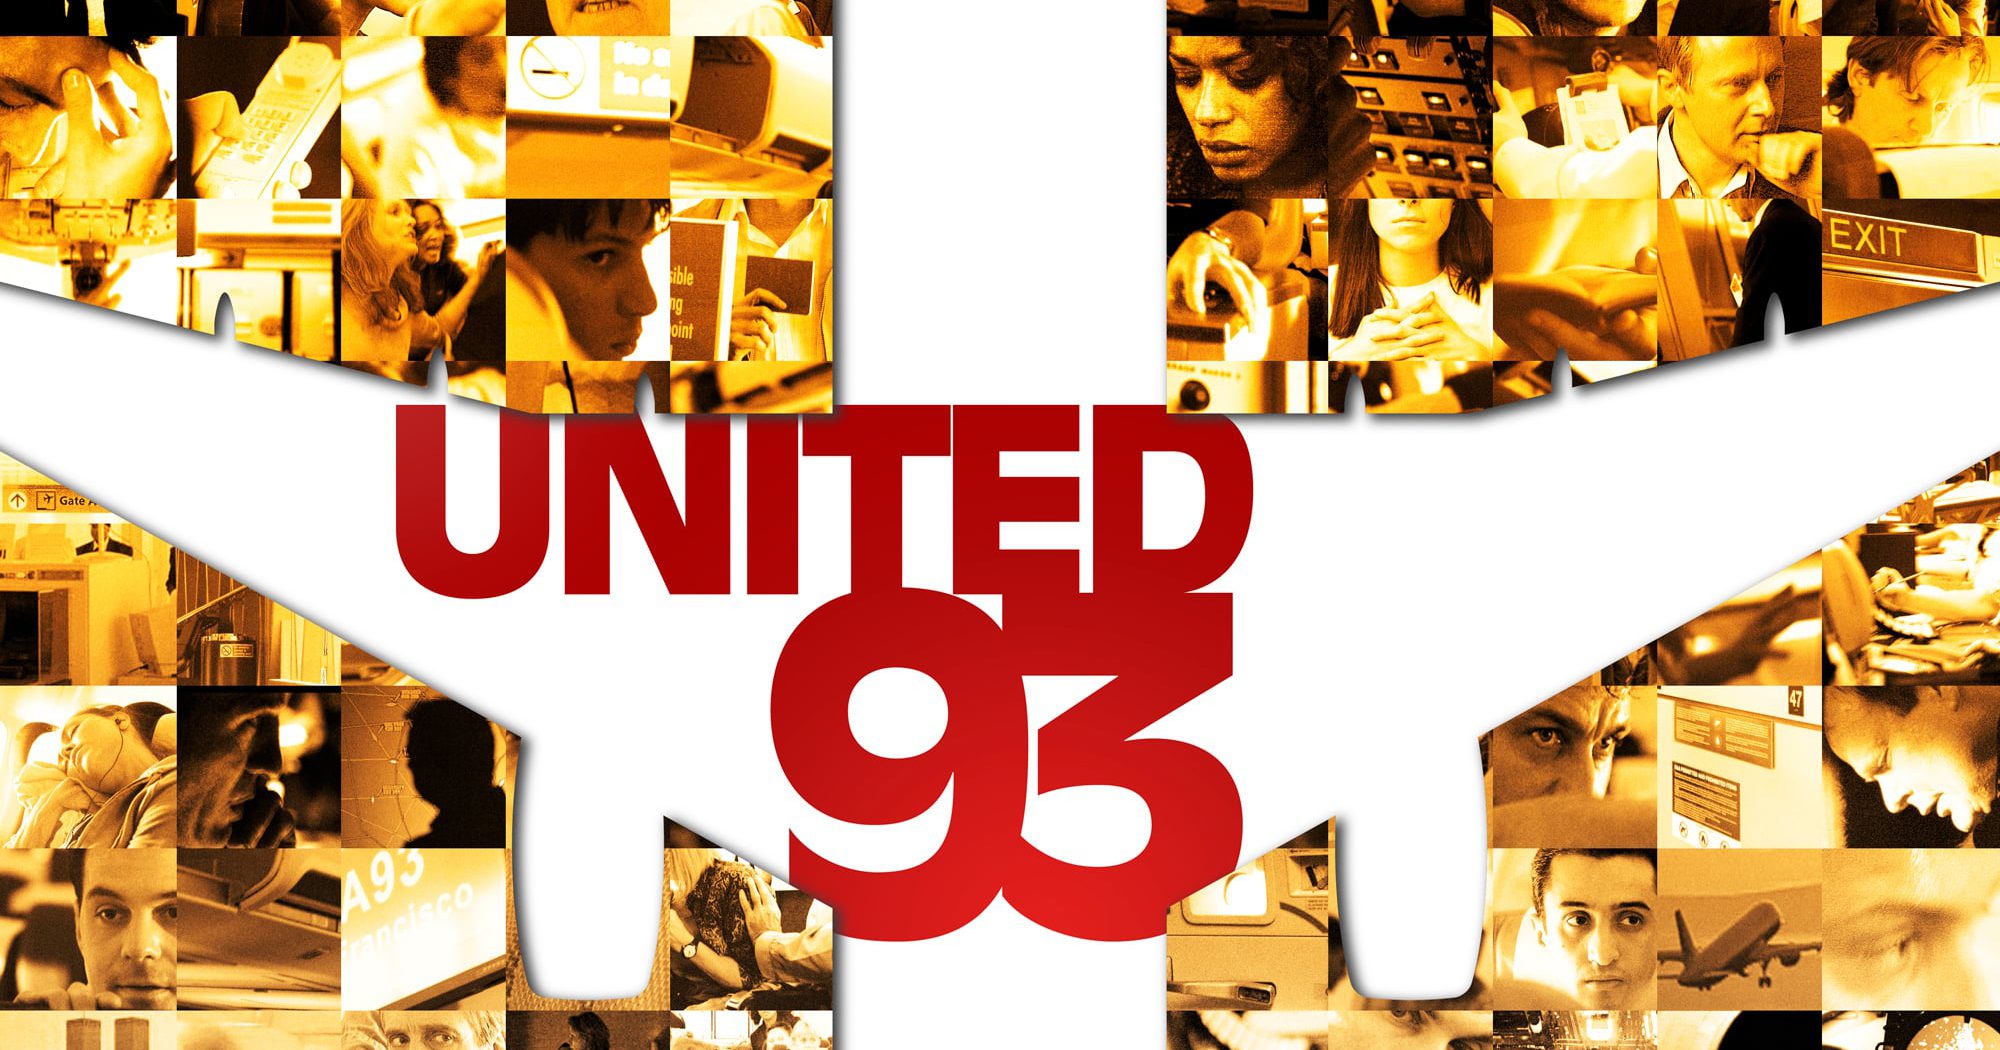 Poster for the movie "United 93"